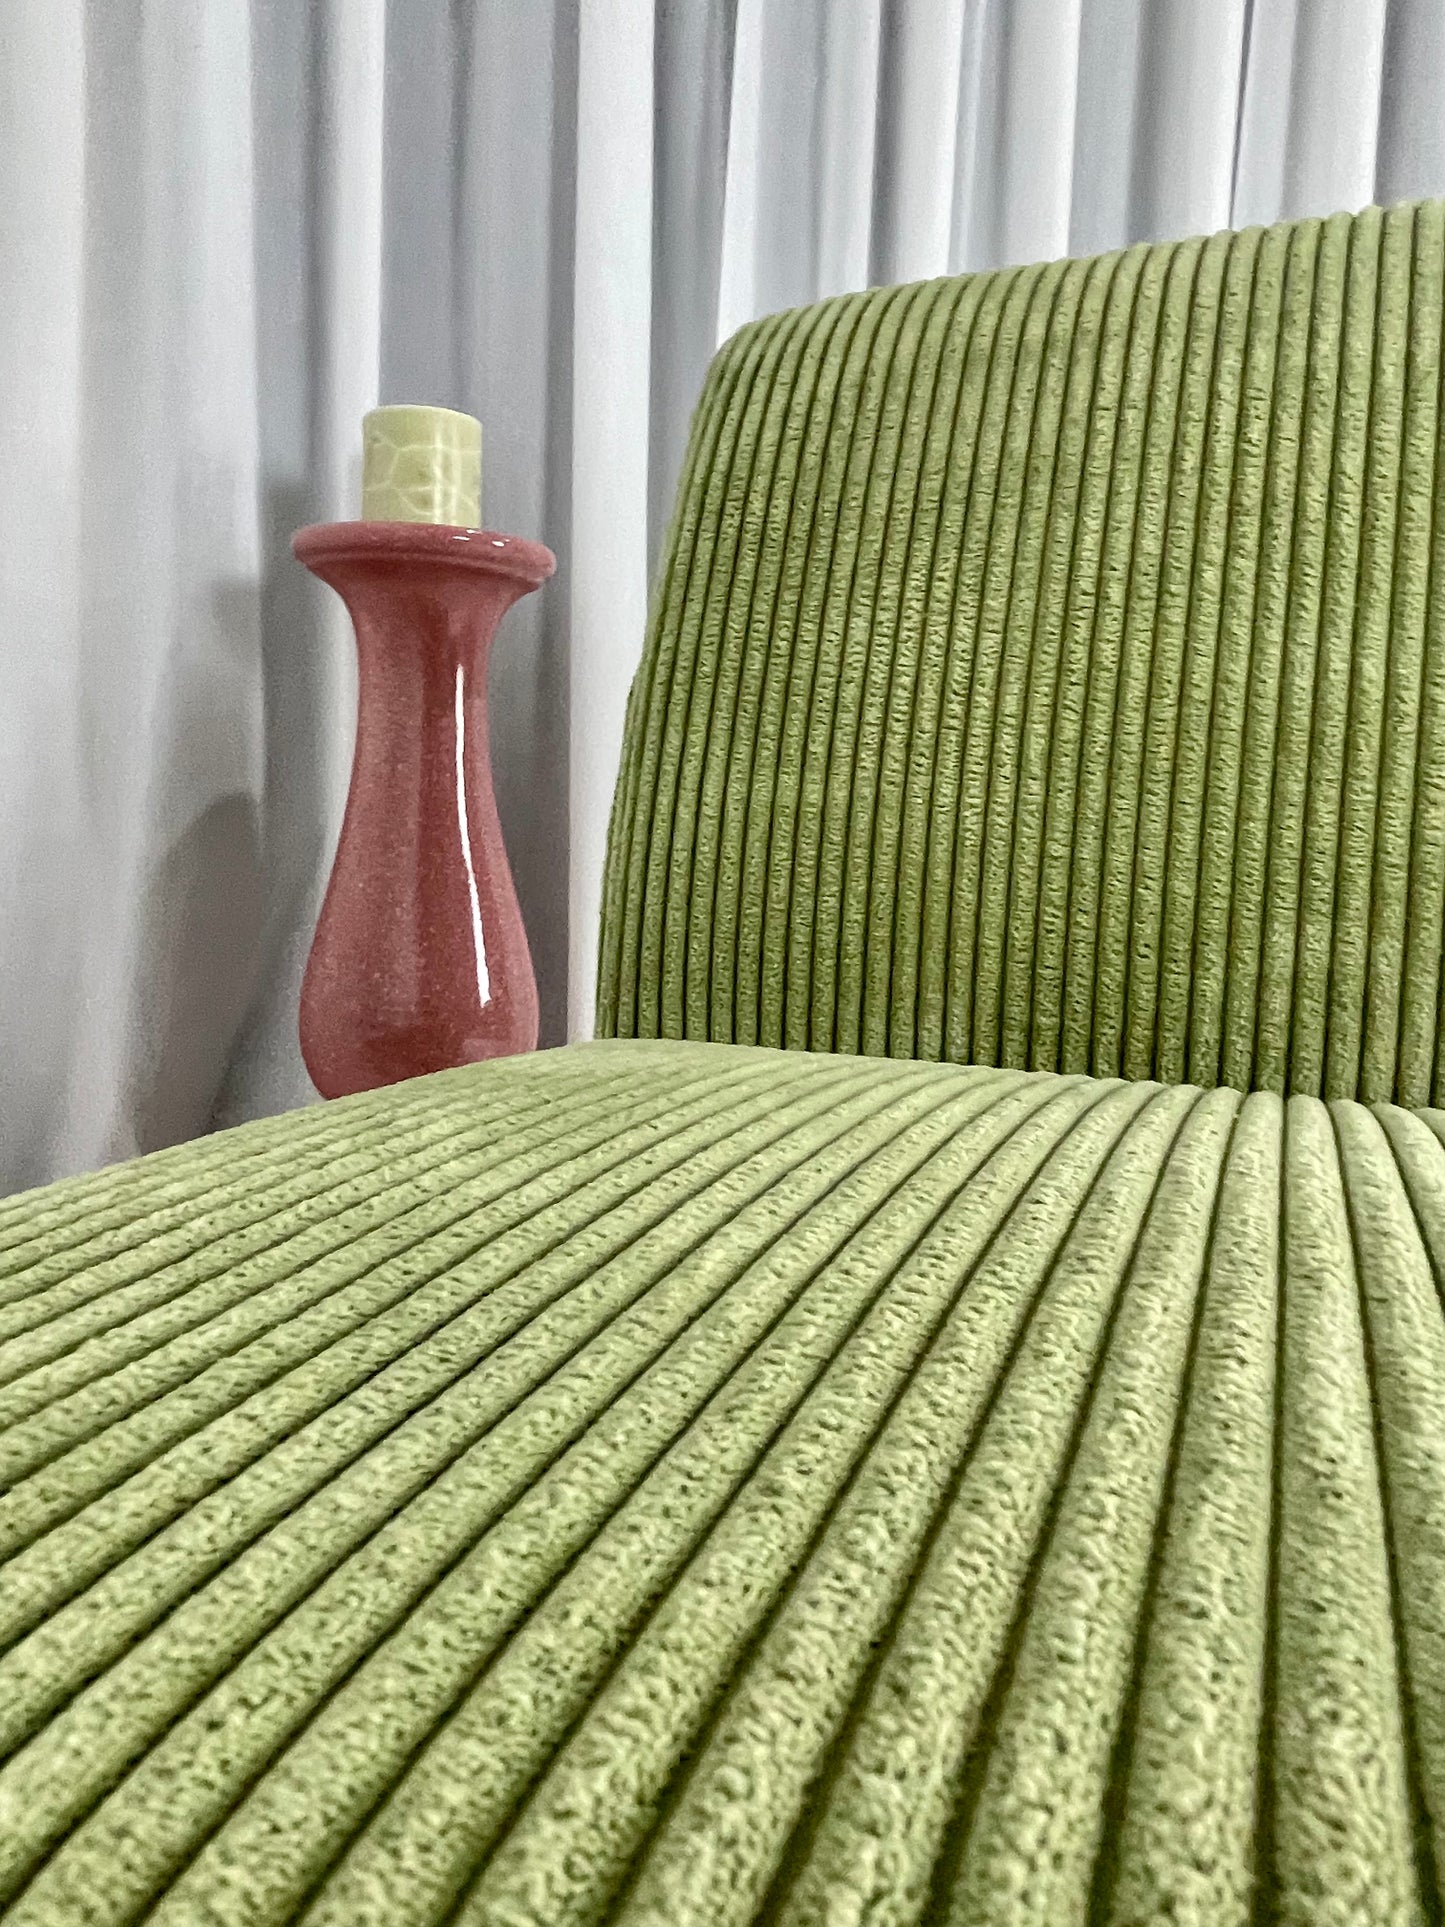 - Green Corduroy Lounge Chair - Four Available